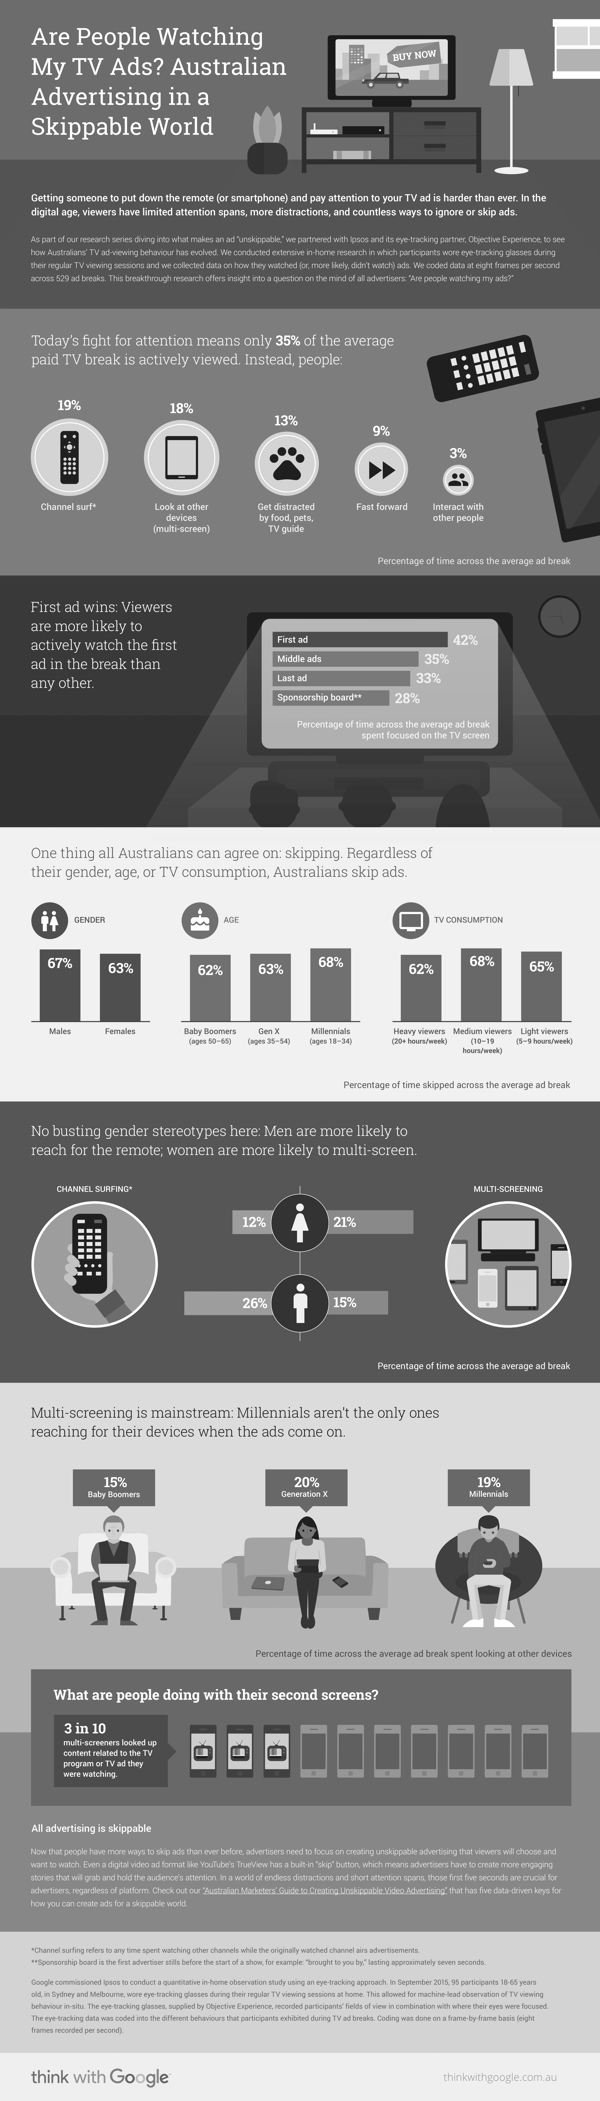 INFOGRAPHIC B_W - Are People Watching My TV Ads - Australia - Think with Google-1